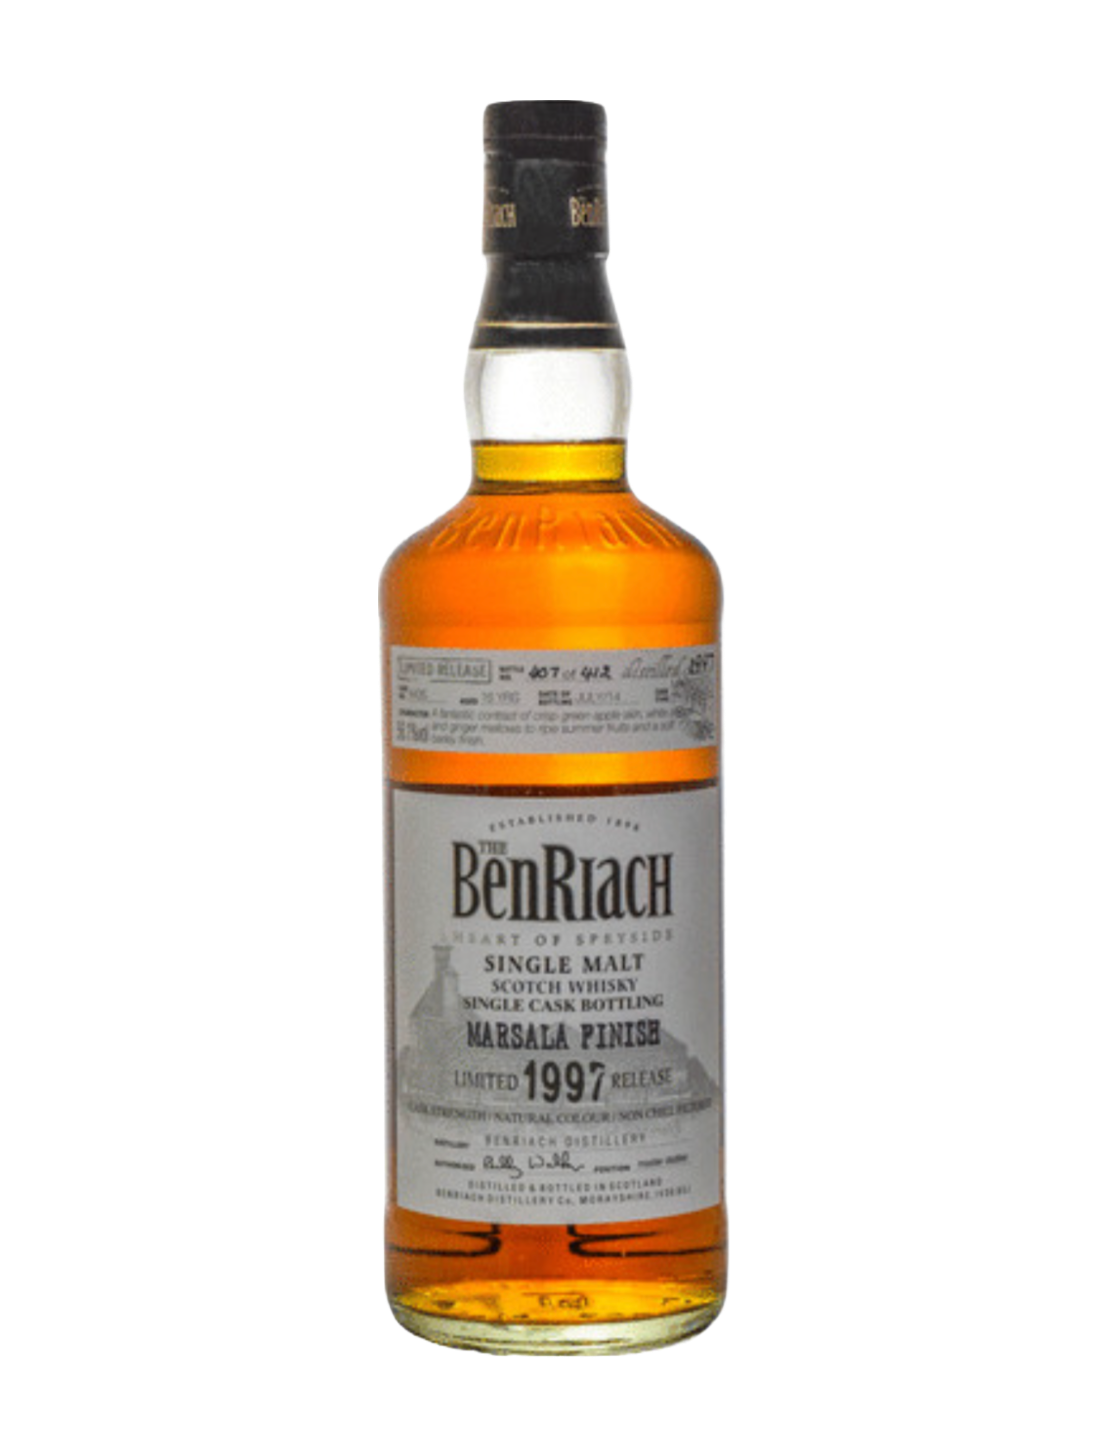 An elegant bottle of Benriach 16 Year Old Single Malt Scotch in front of a plain white background